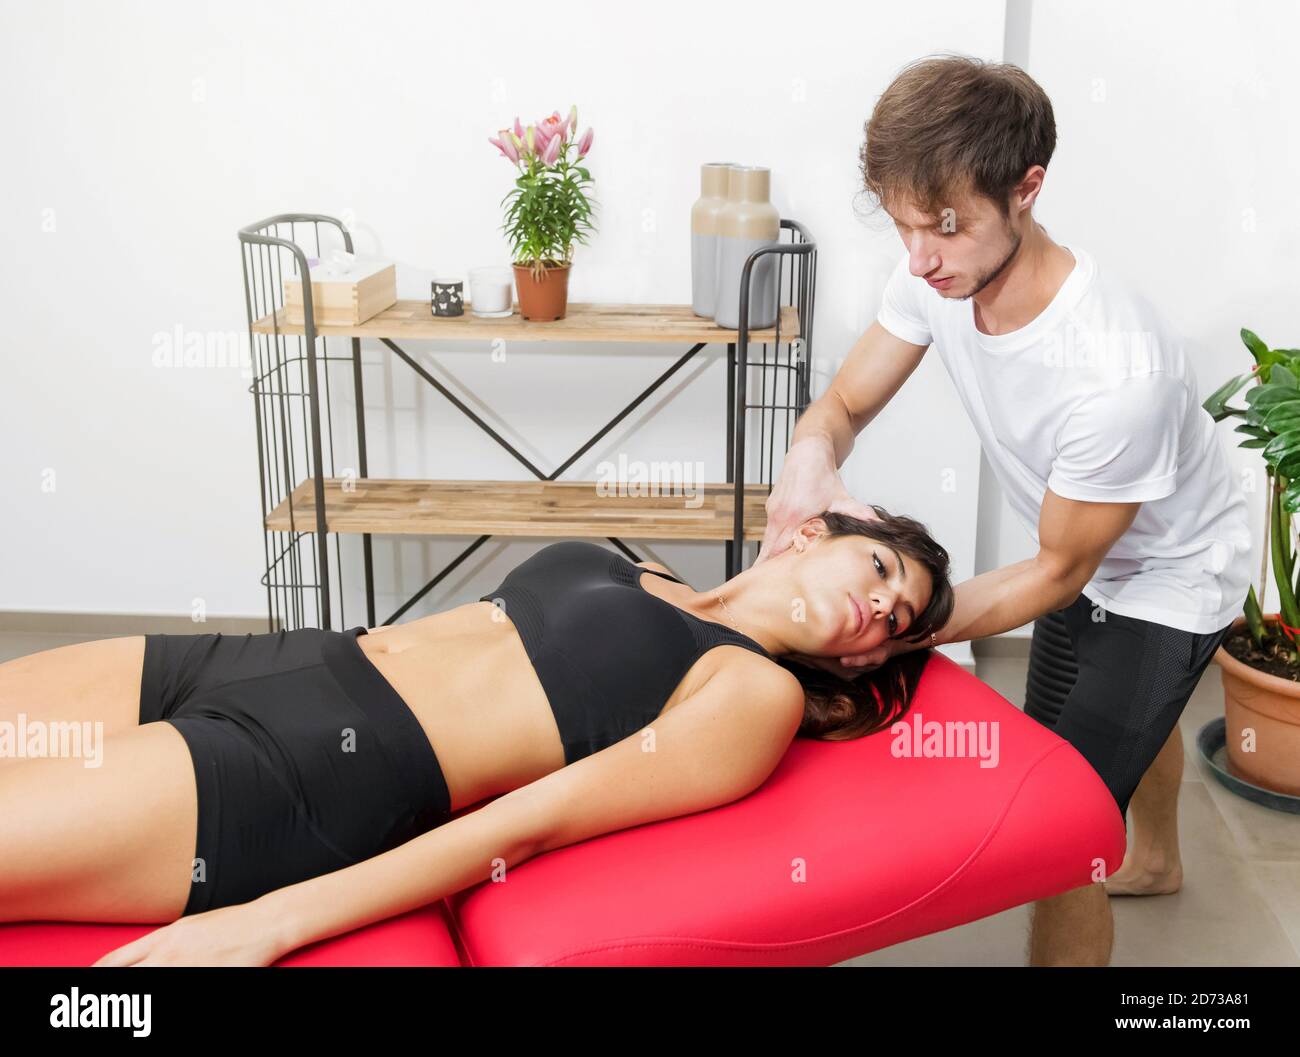 Osteopath performing cervical trust on a woman patient manipulating her spine during a consultation in his clinic Stock Photo